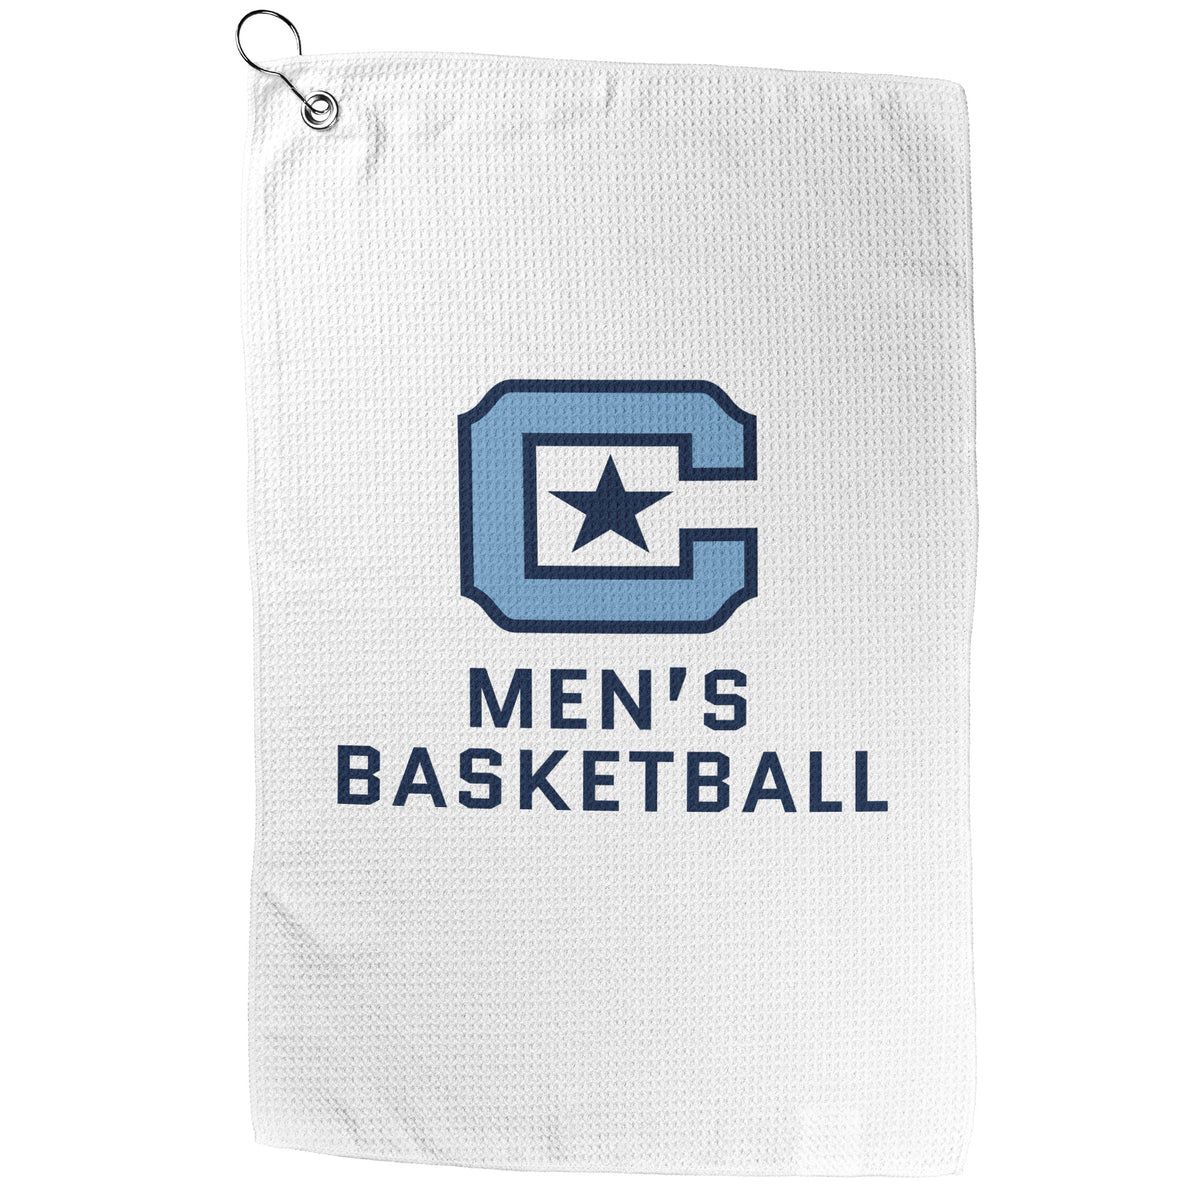 The Citadel, Club Sports Men's Basketball, Double Sided Golf Towel